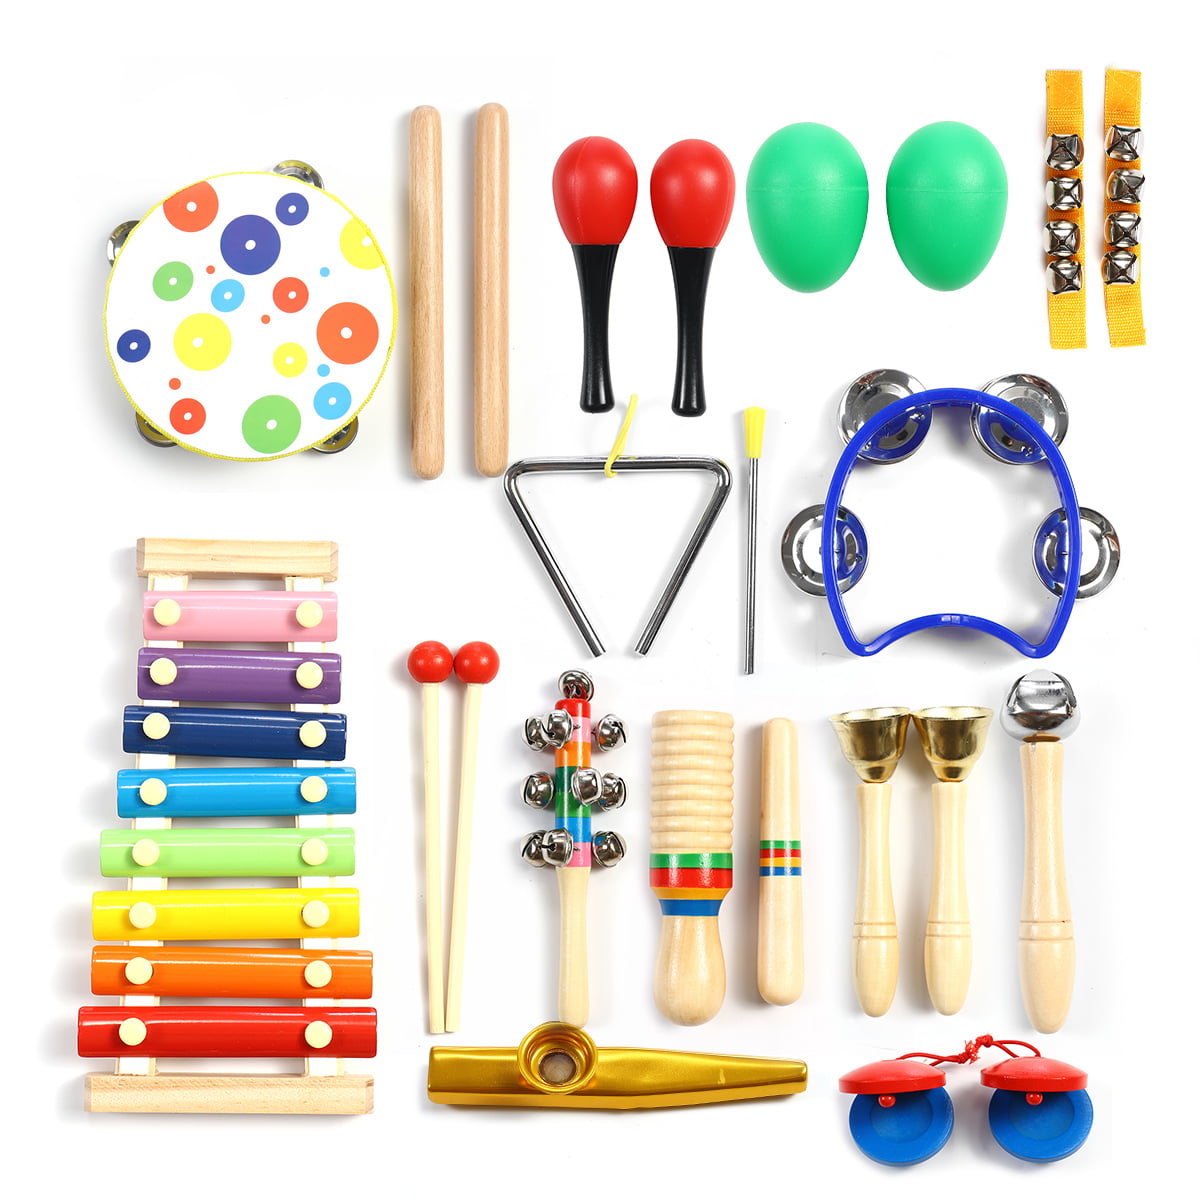 Percussion Instruments Baby Early Educational Music Toys Including Tambourine Maraca,Storage Bag 25 PcsToddler Musical Instruments Wooden Music Toys Set Better Gift for Kids